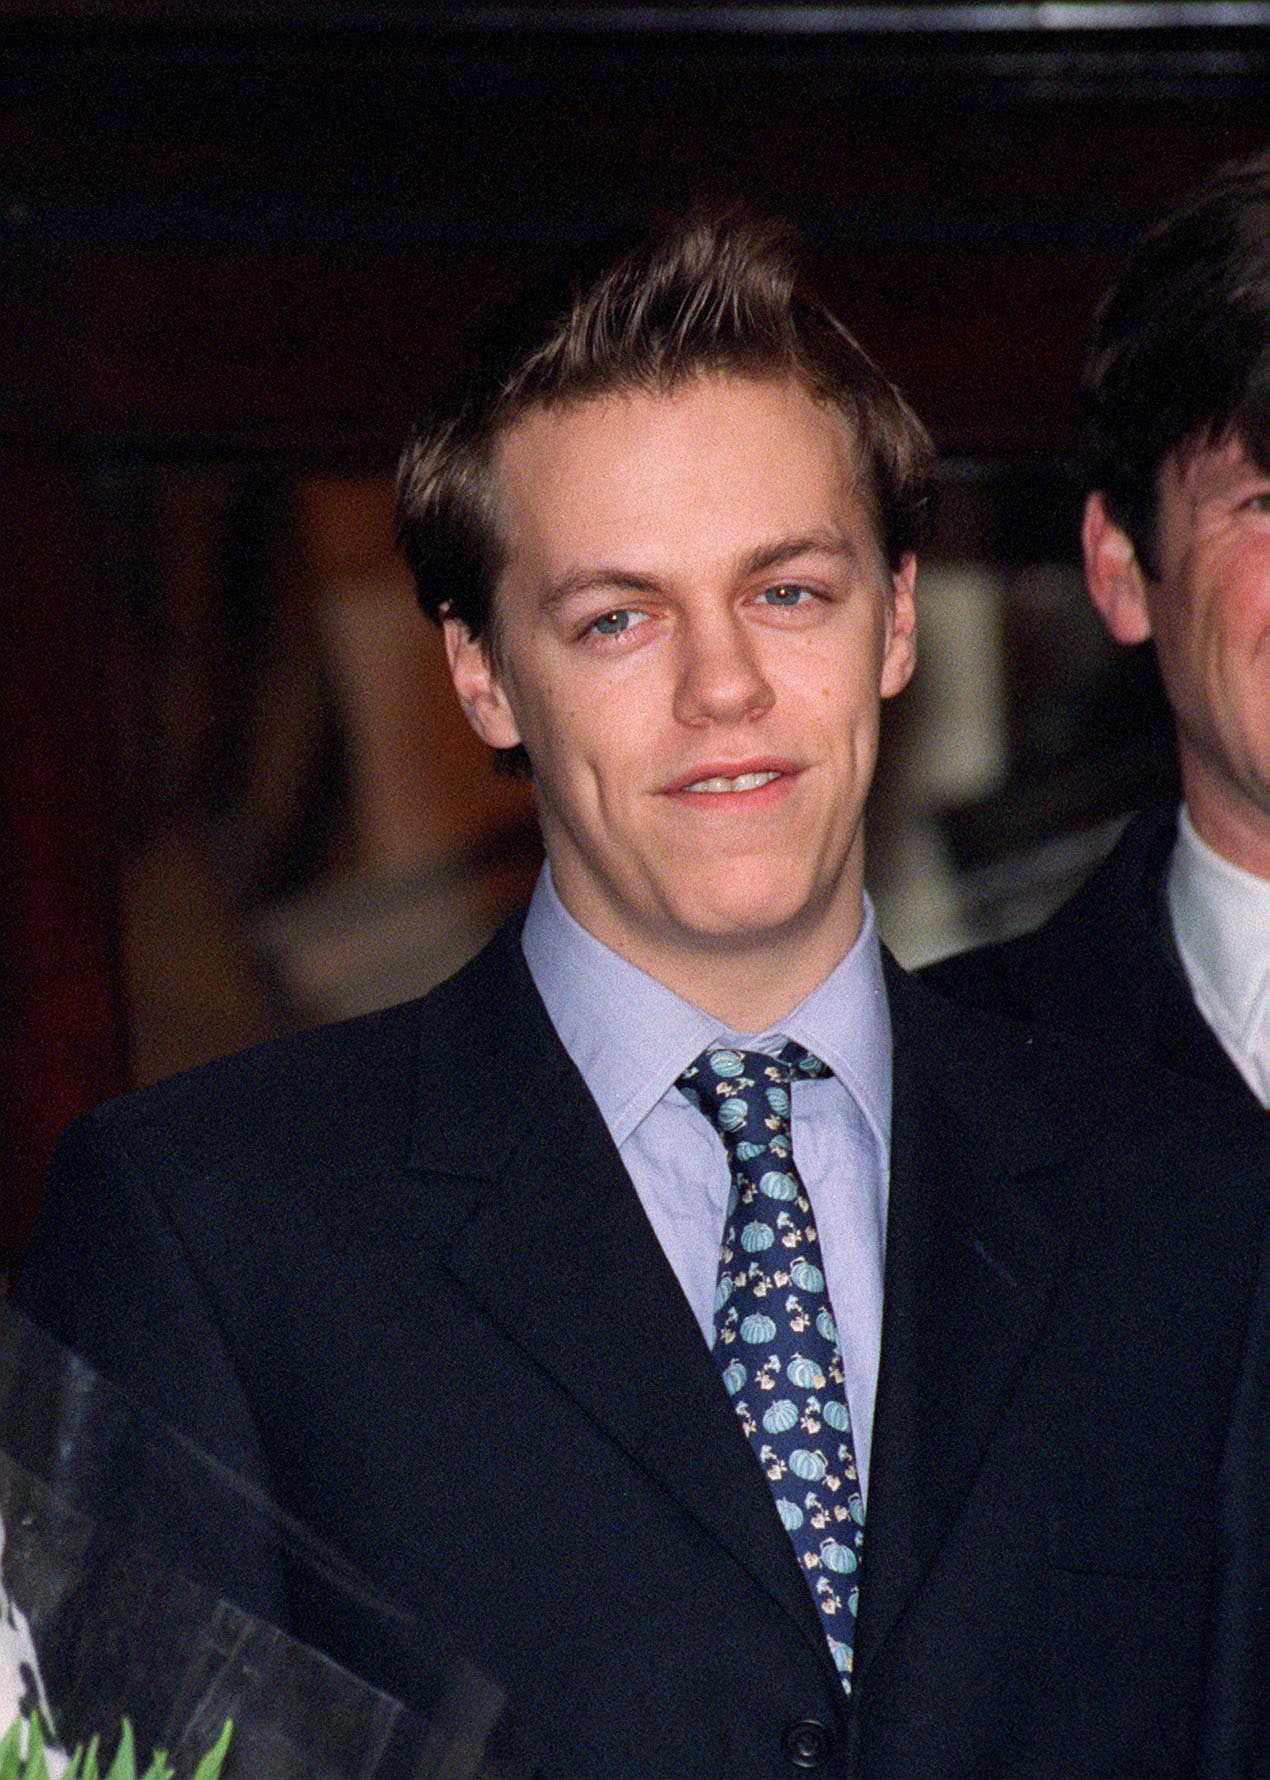 Photo of the boy attending his father's wedding on February 7, 1996. | Source: Getty Images